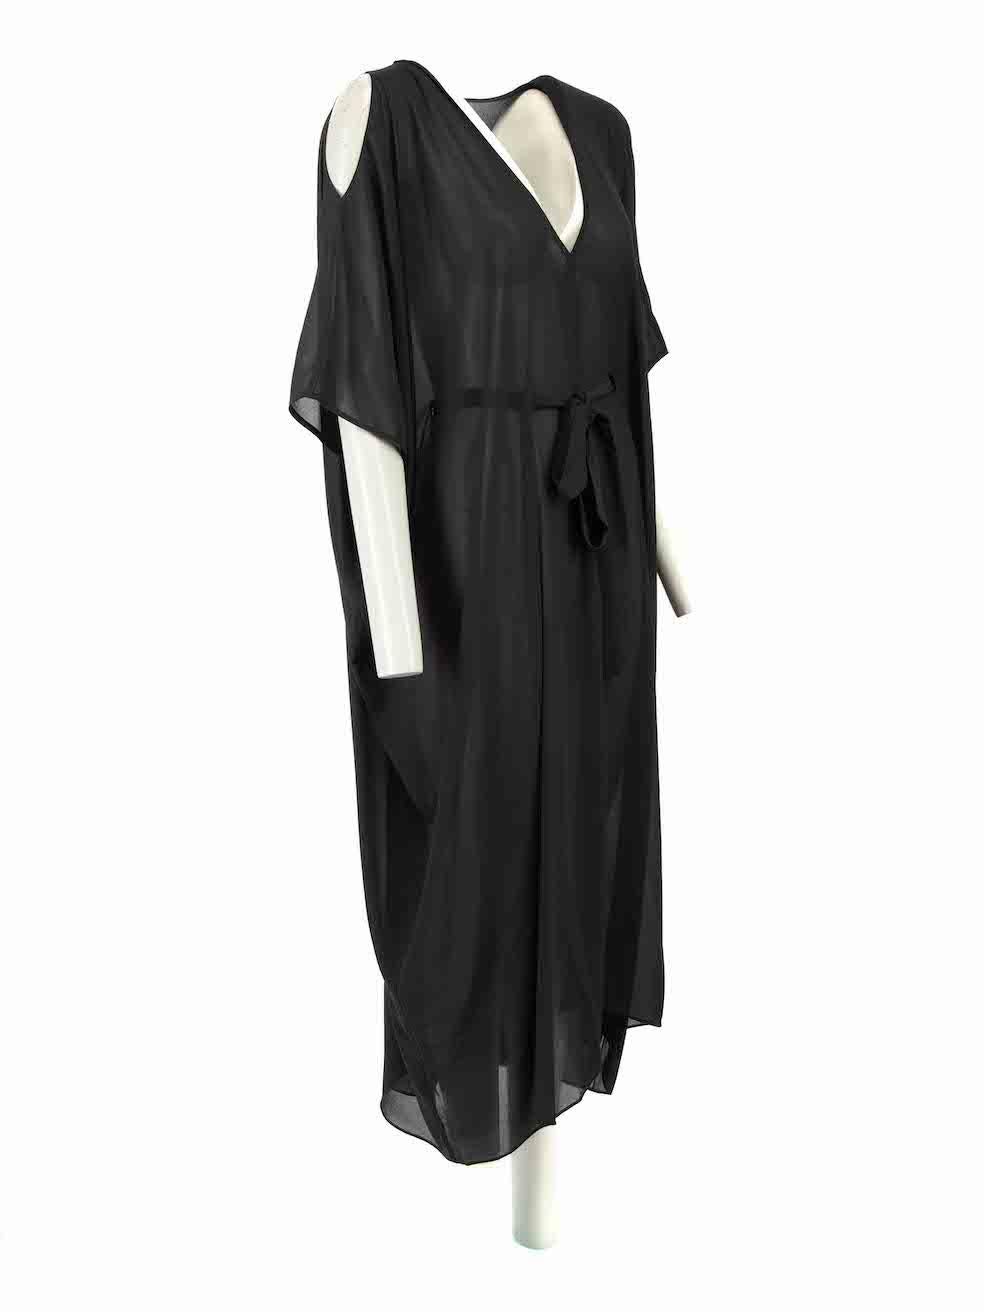 CONDITION is Very good. Hardly any visible wear to kaftan is evident on this used L'Agent by Agent Provocateur designer resale item.
 
Details 
Black 
Polyester 
Kaftan 
Sheer 
V-neck 
Shoulder cut outs 
Waist tie detail
 
Made in China
